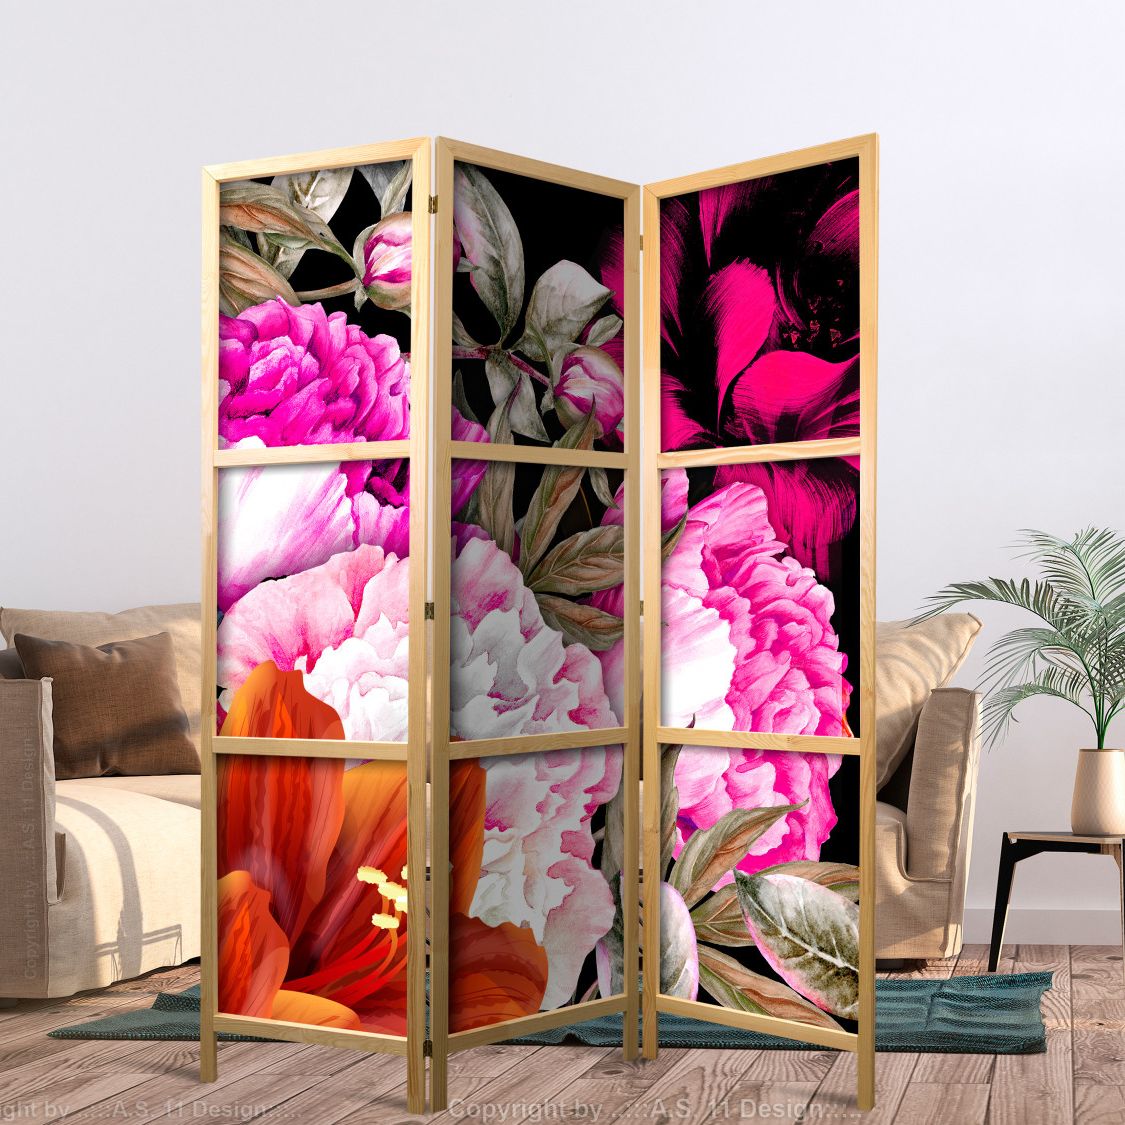 a 3 piece japanese room divider in a living room, there's some beautiful flowers motifs in the canvas of the room divider, it's appears high quality and printed on top of it